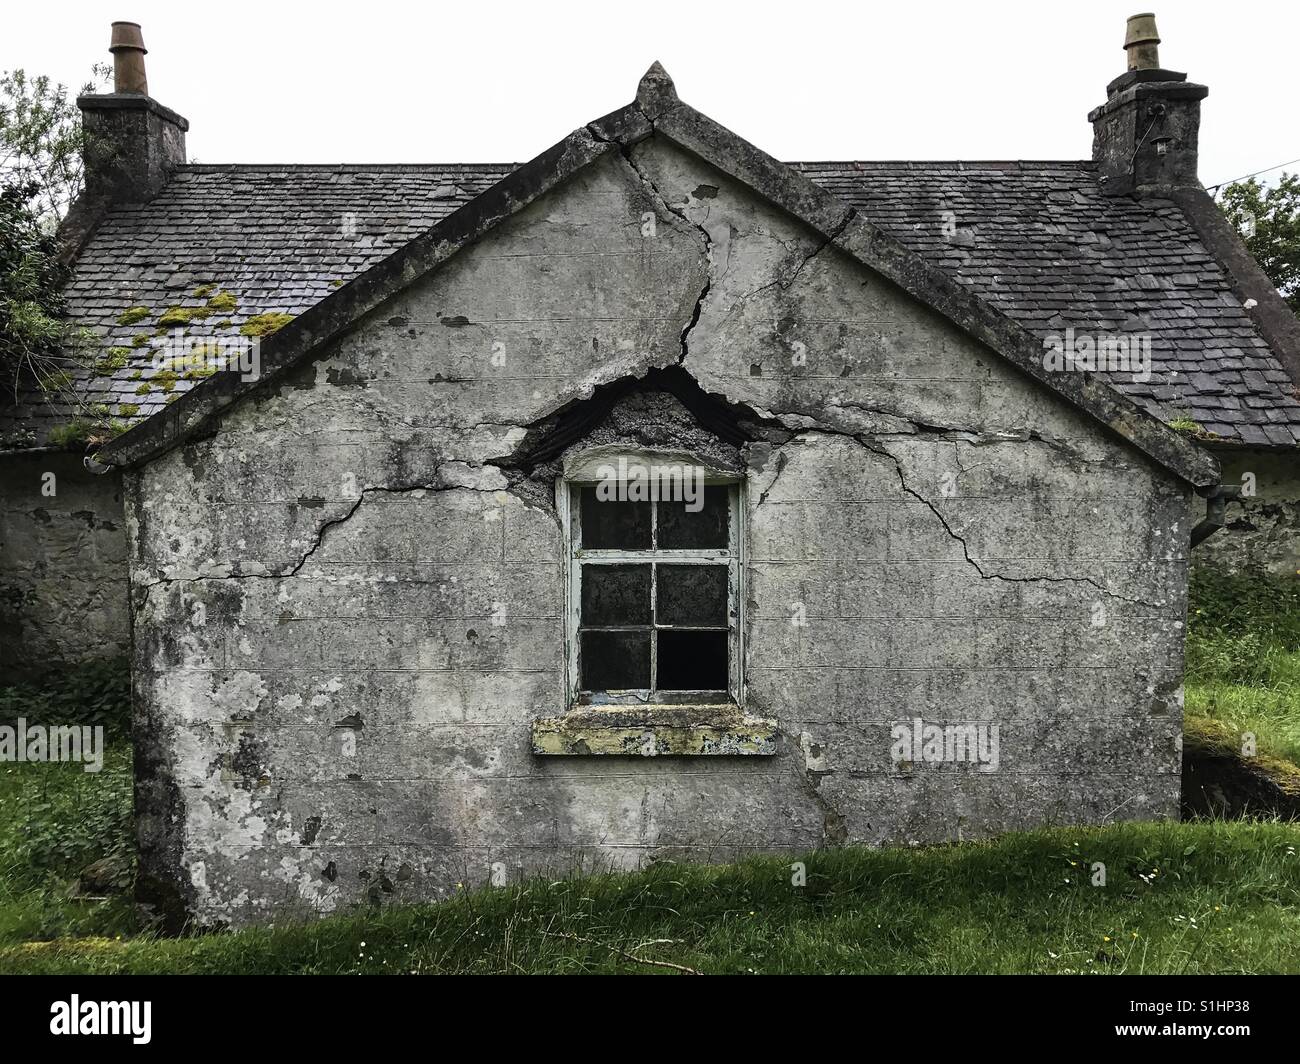 Cracks in the brickwork around the window of an remote old house on the Isle of Mull, Scotland. Stock Photo